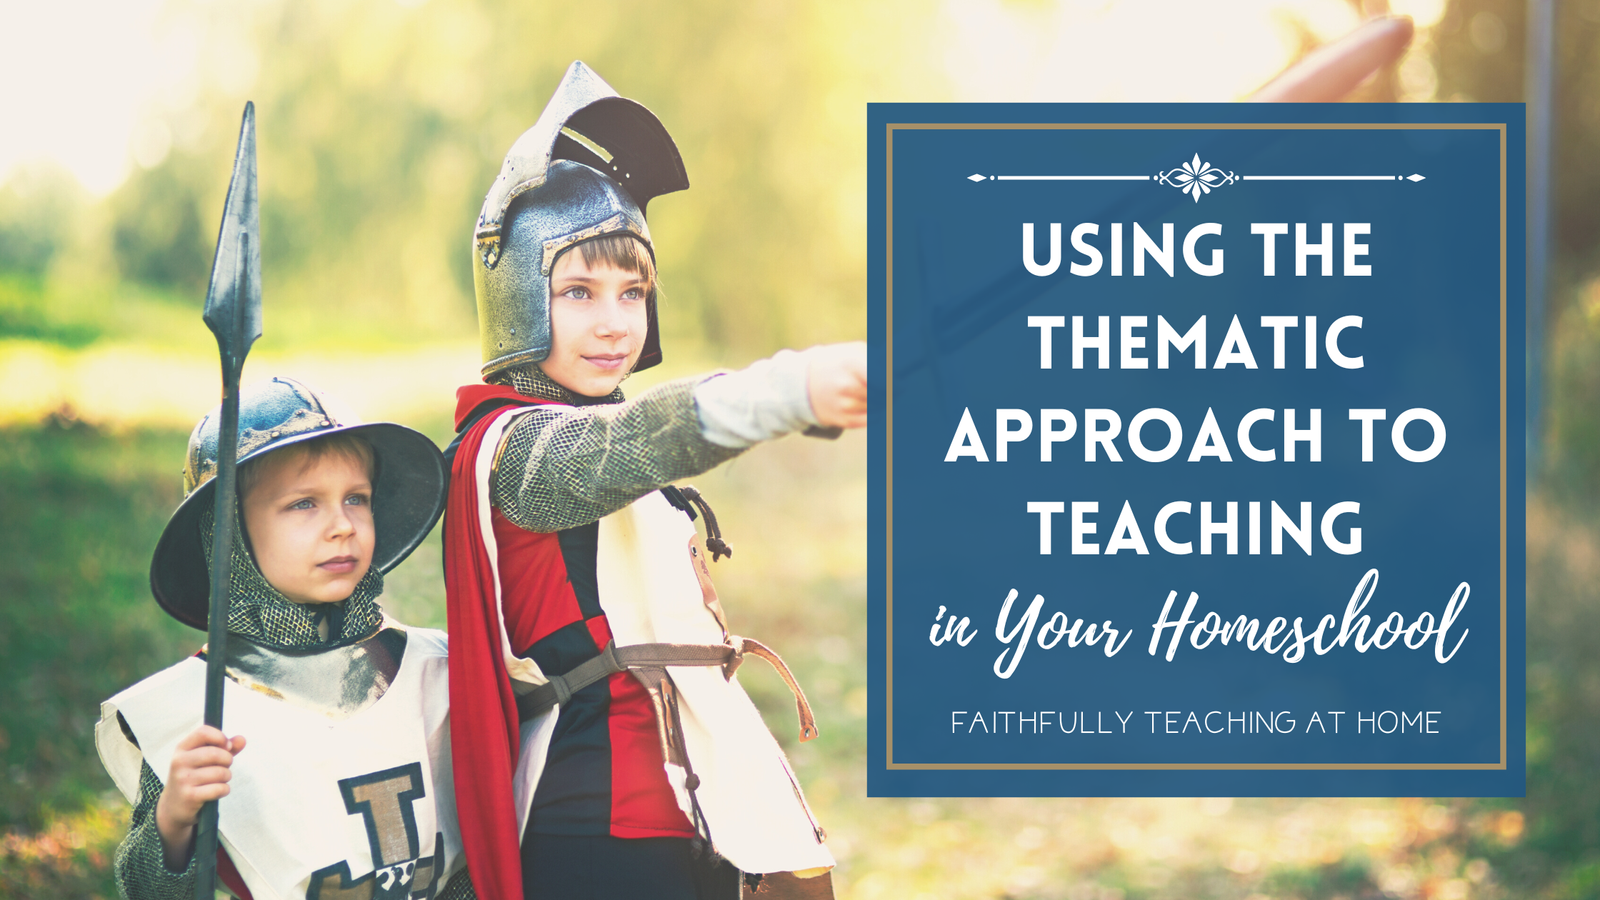 How to effectively homeschool using the thematic approach to teaching